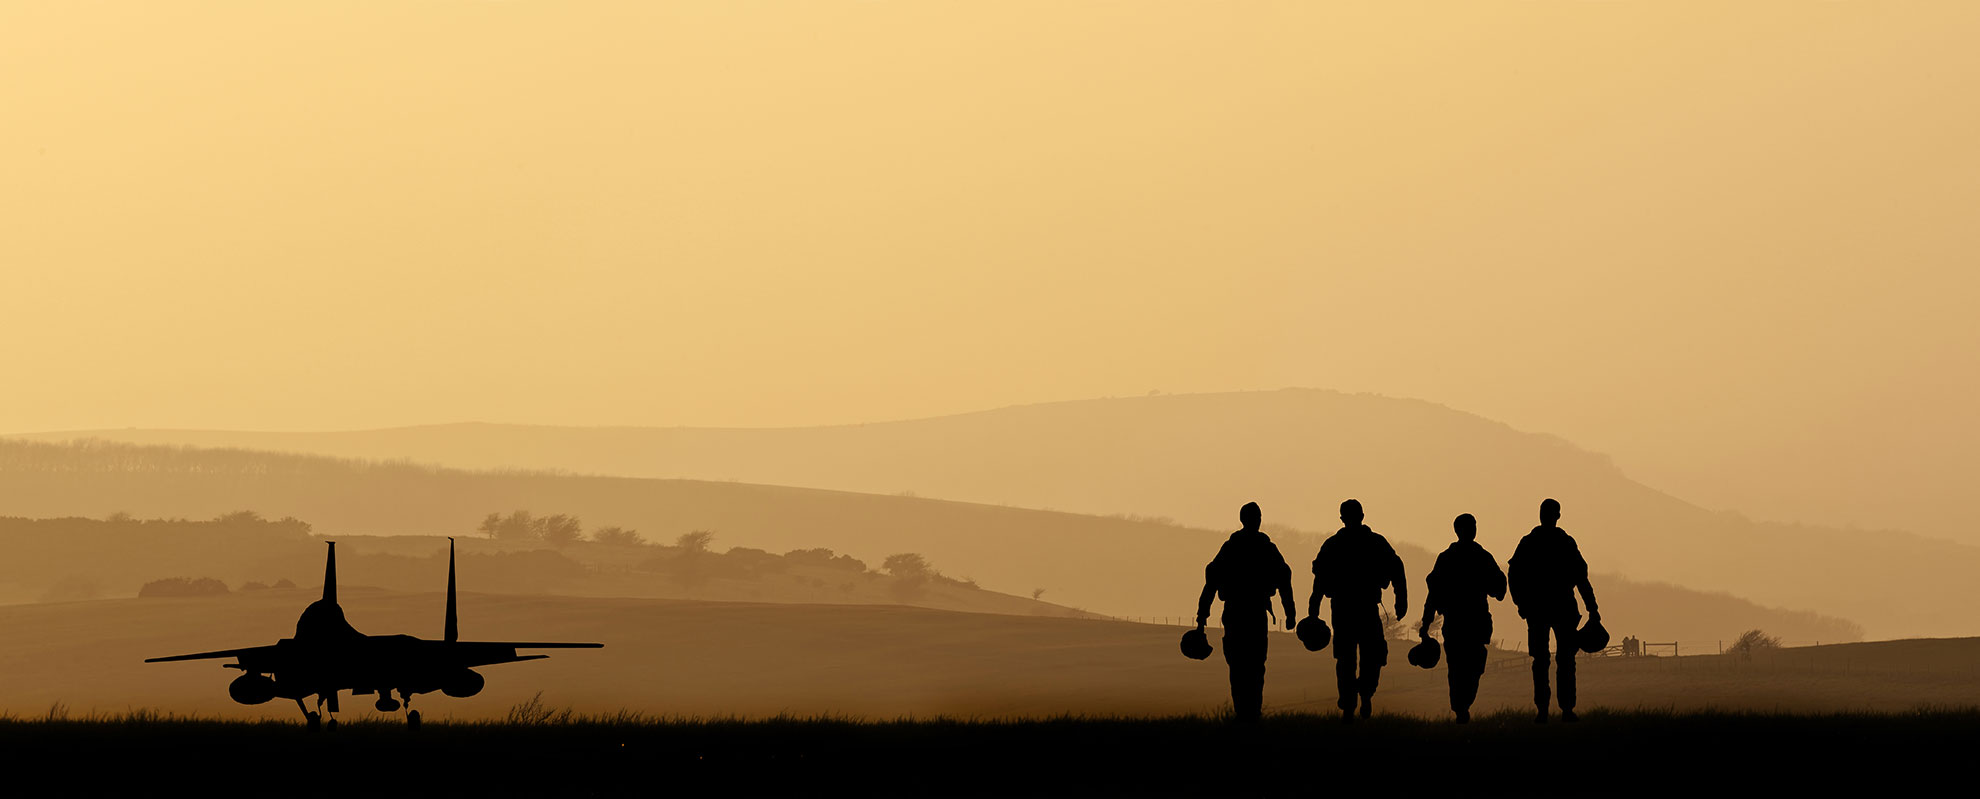 Silhouette: Four pilots stroll past an aircraft.